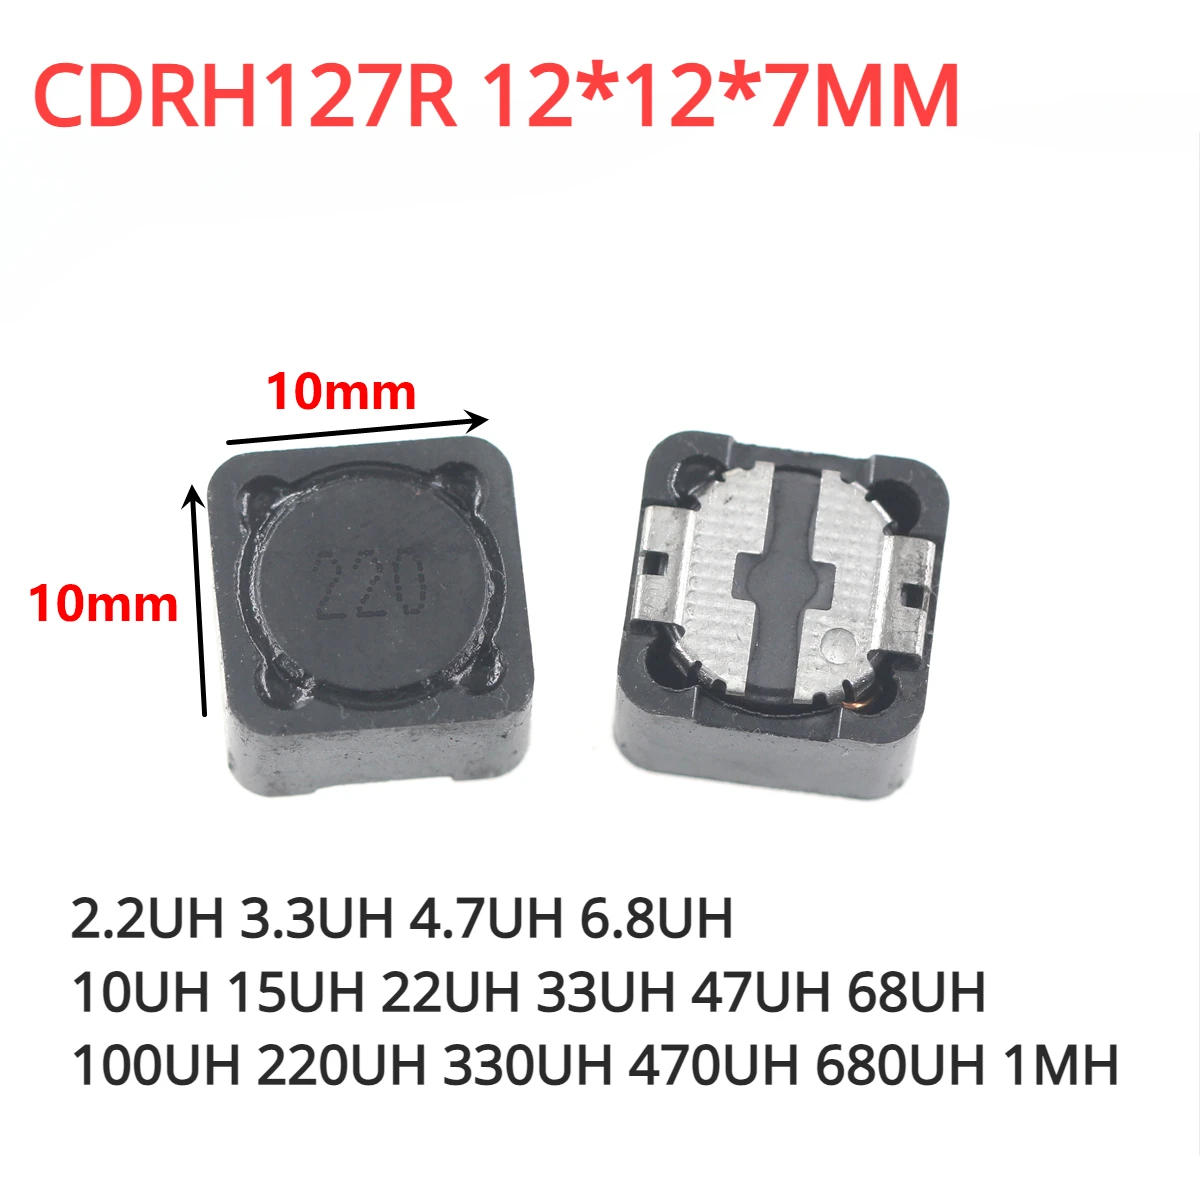 10PCS Shielded Inductor SMD Power Inductor CDRH127R 12*12*7MM 2.2UH/3.3UH/4.7/6.8/10UH/22UH/33/47/68/100UH/220/330/470/680UH 1MH